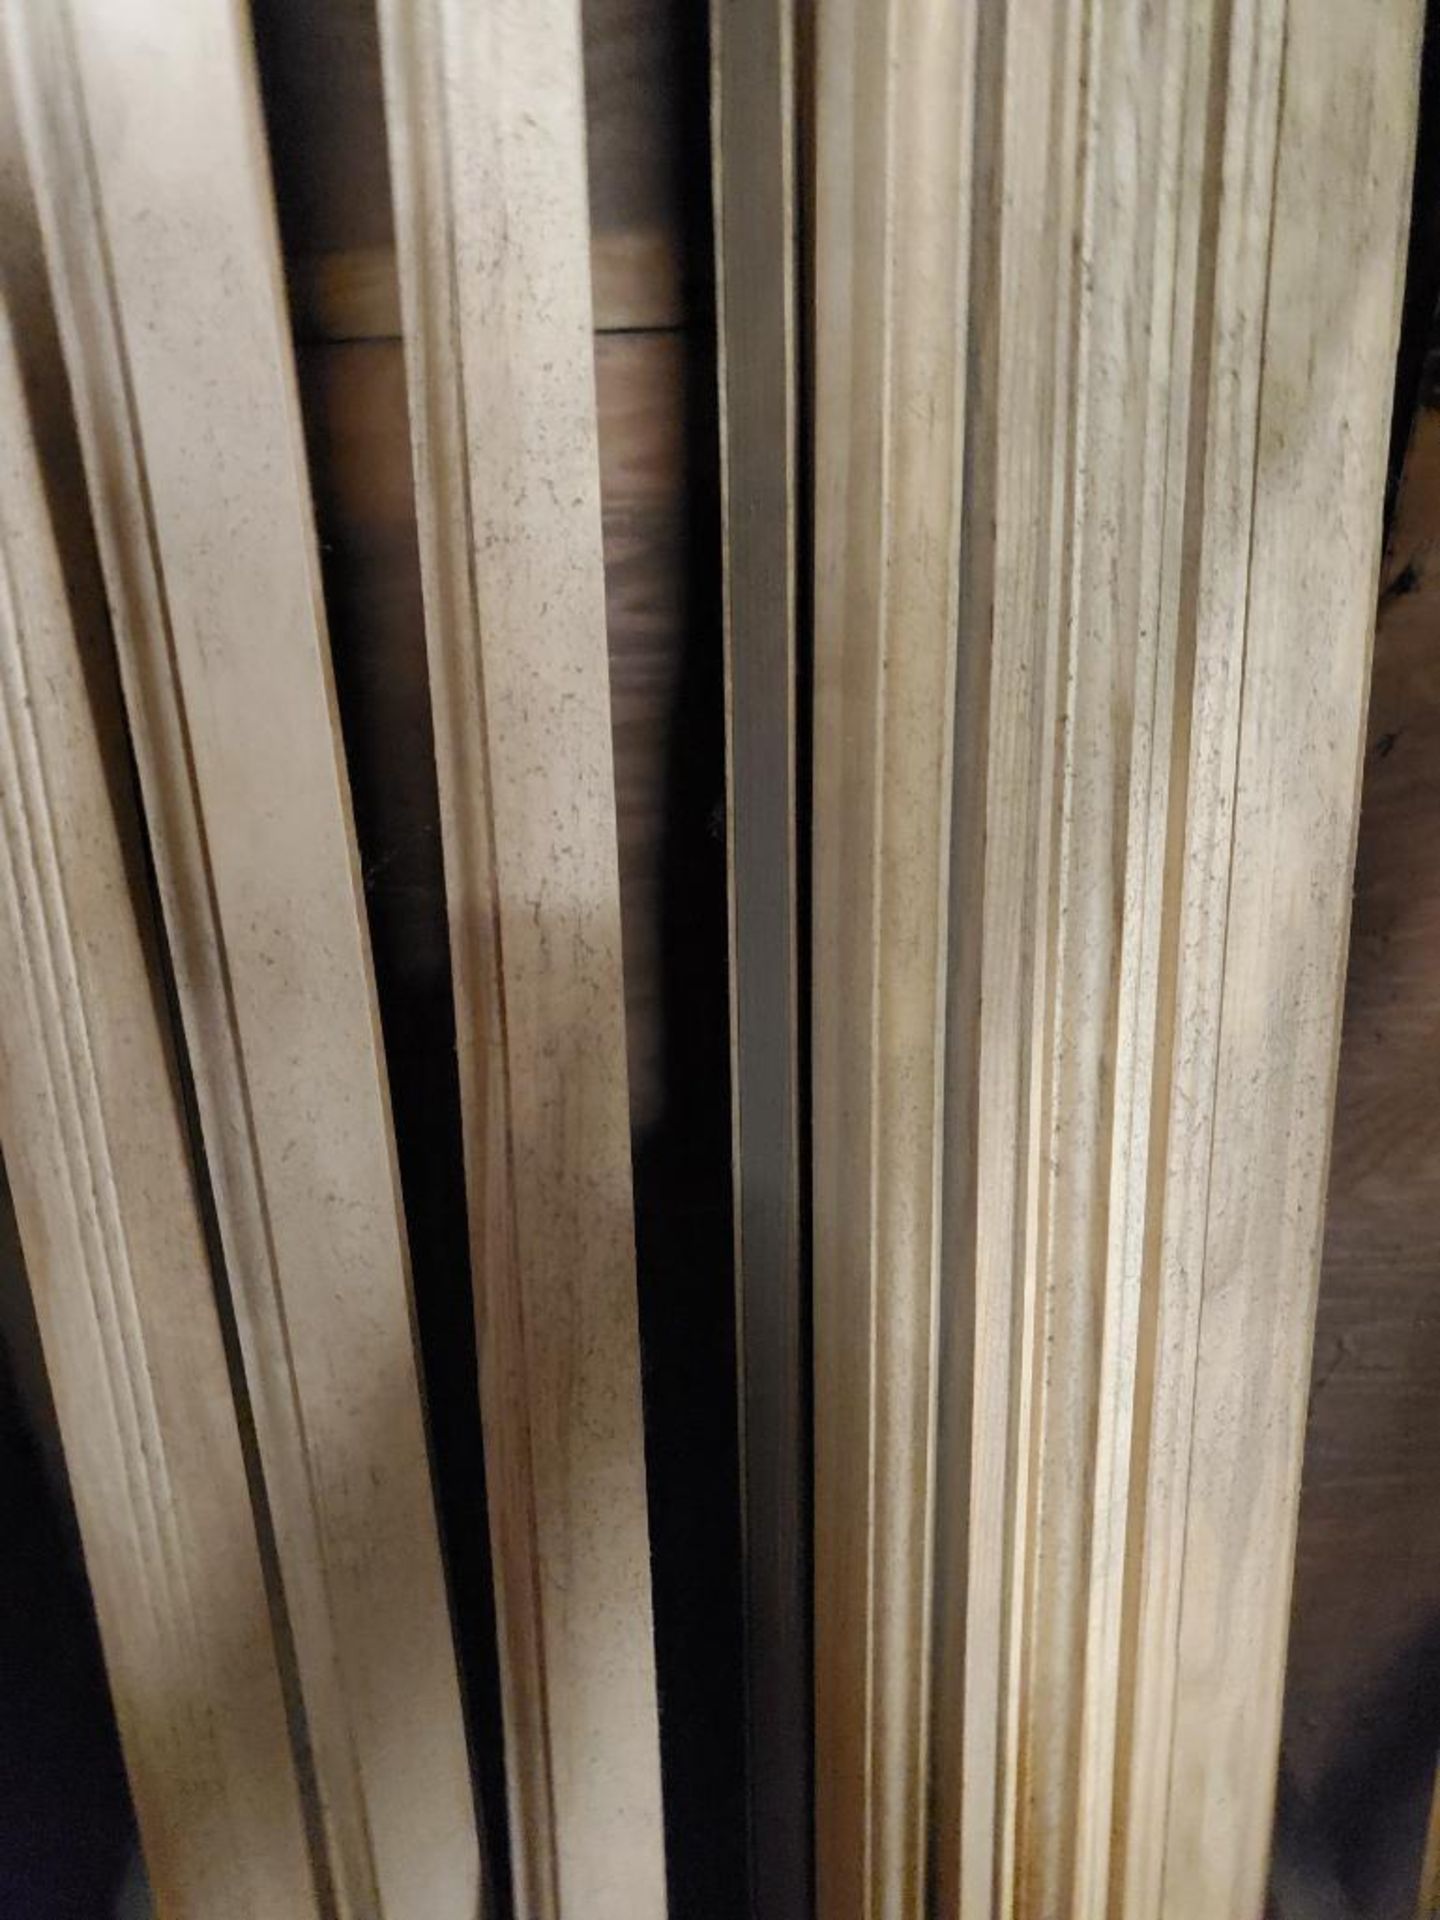 Qty 2- Section of assorted wood trim. - Image 4 of 4